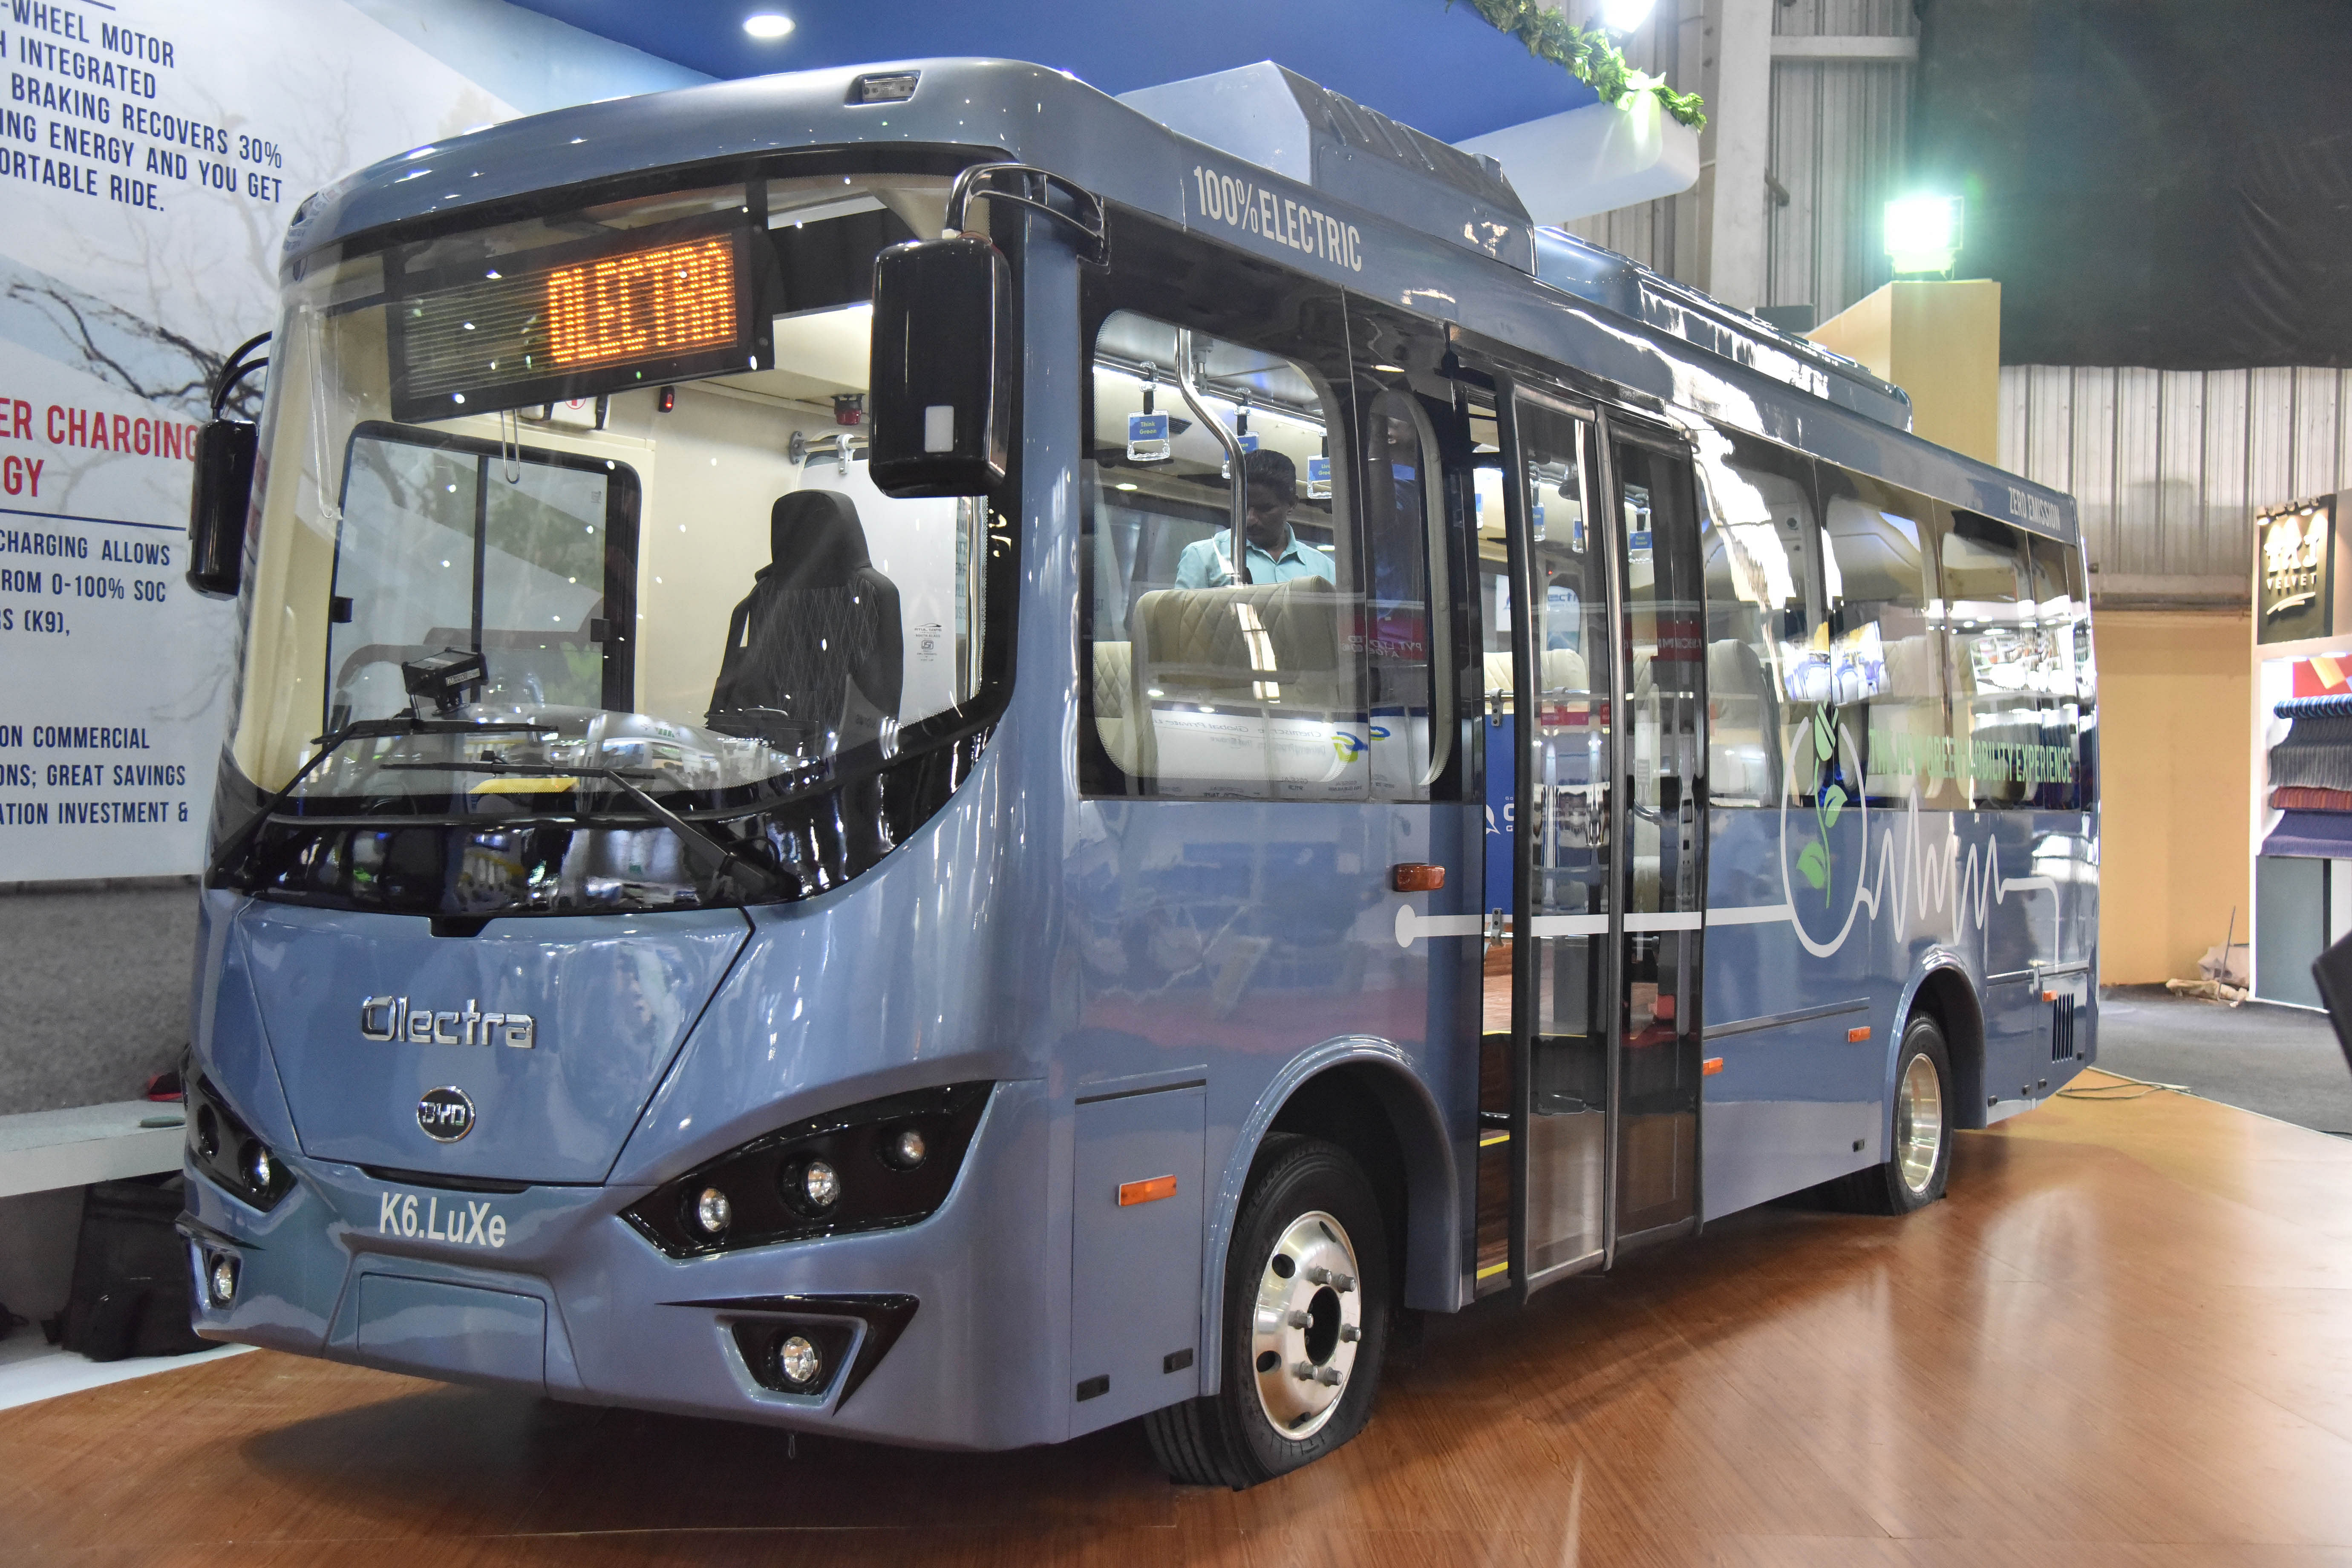 Olectra K6.LUXe electric bus at the inauguration of busworld India Bengaluru 8th edition of b2b organised by busworld at BIEC in Bengaluru. (DH Photo)